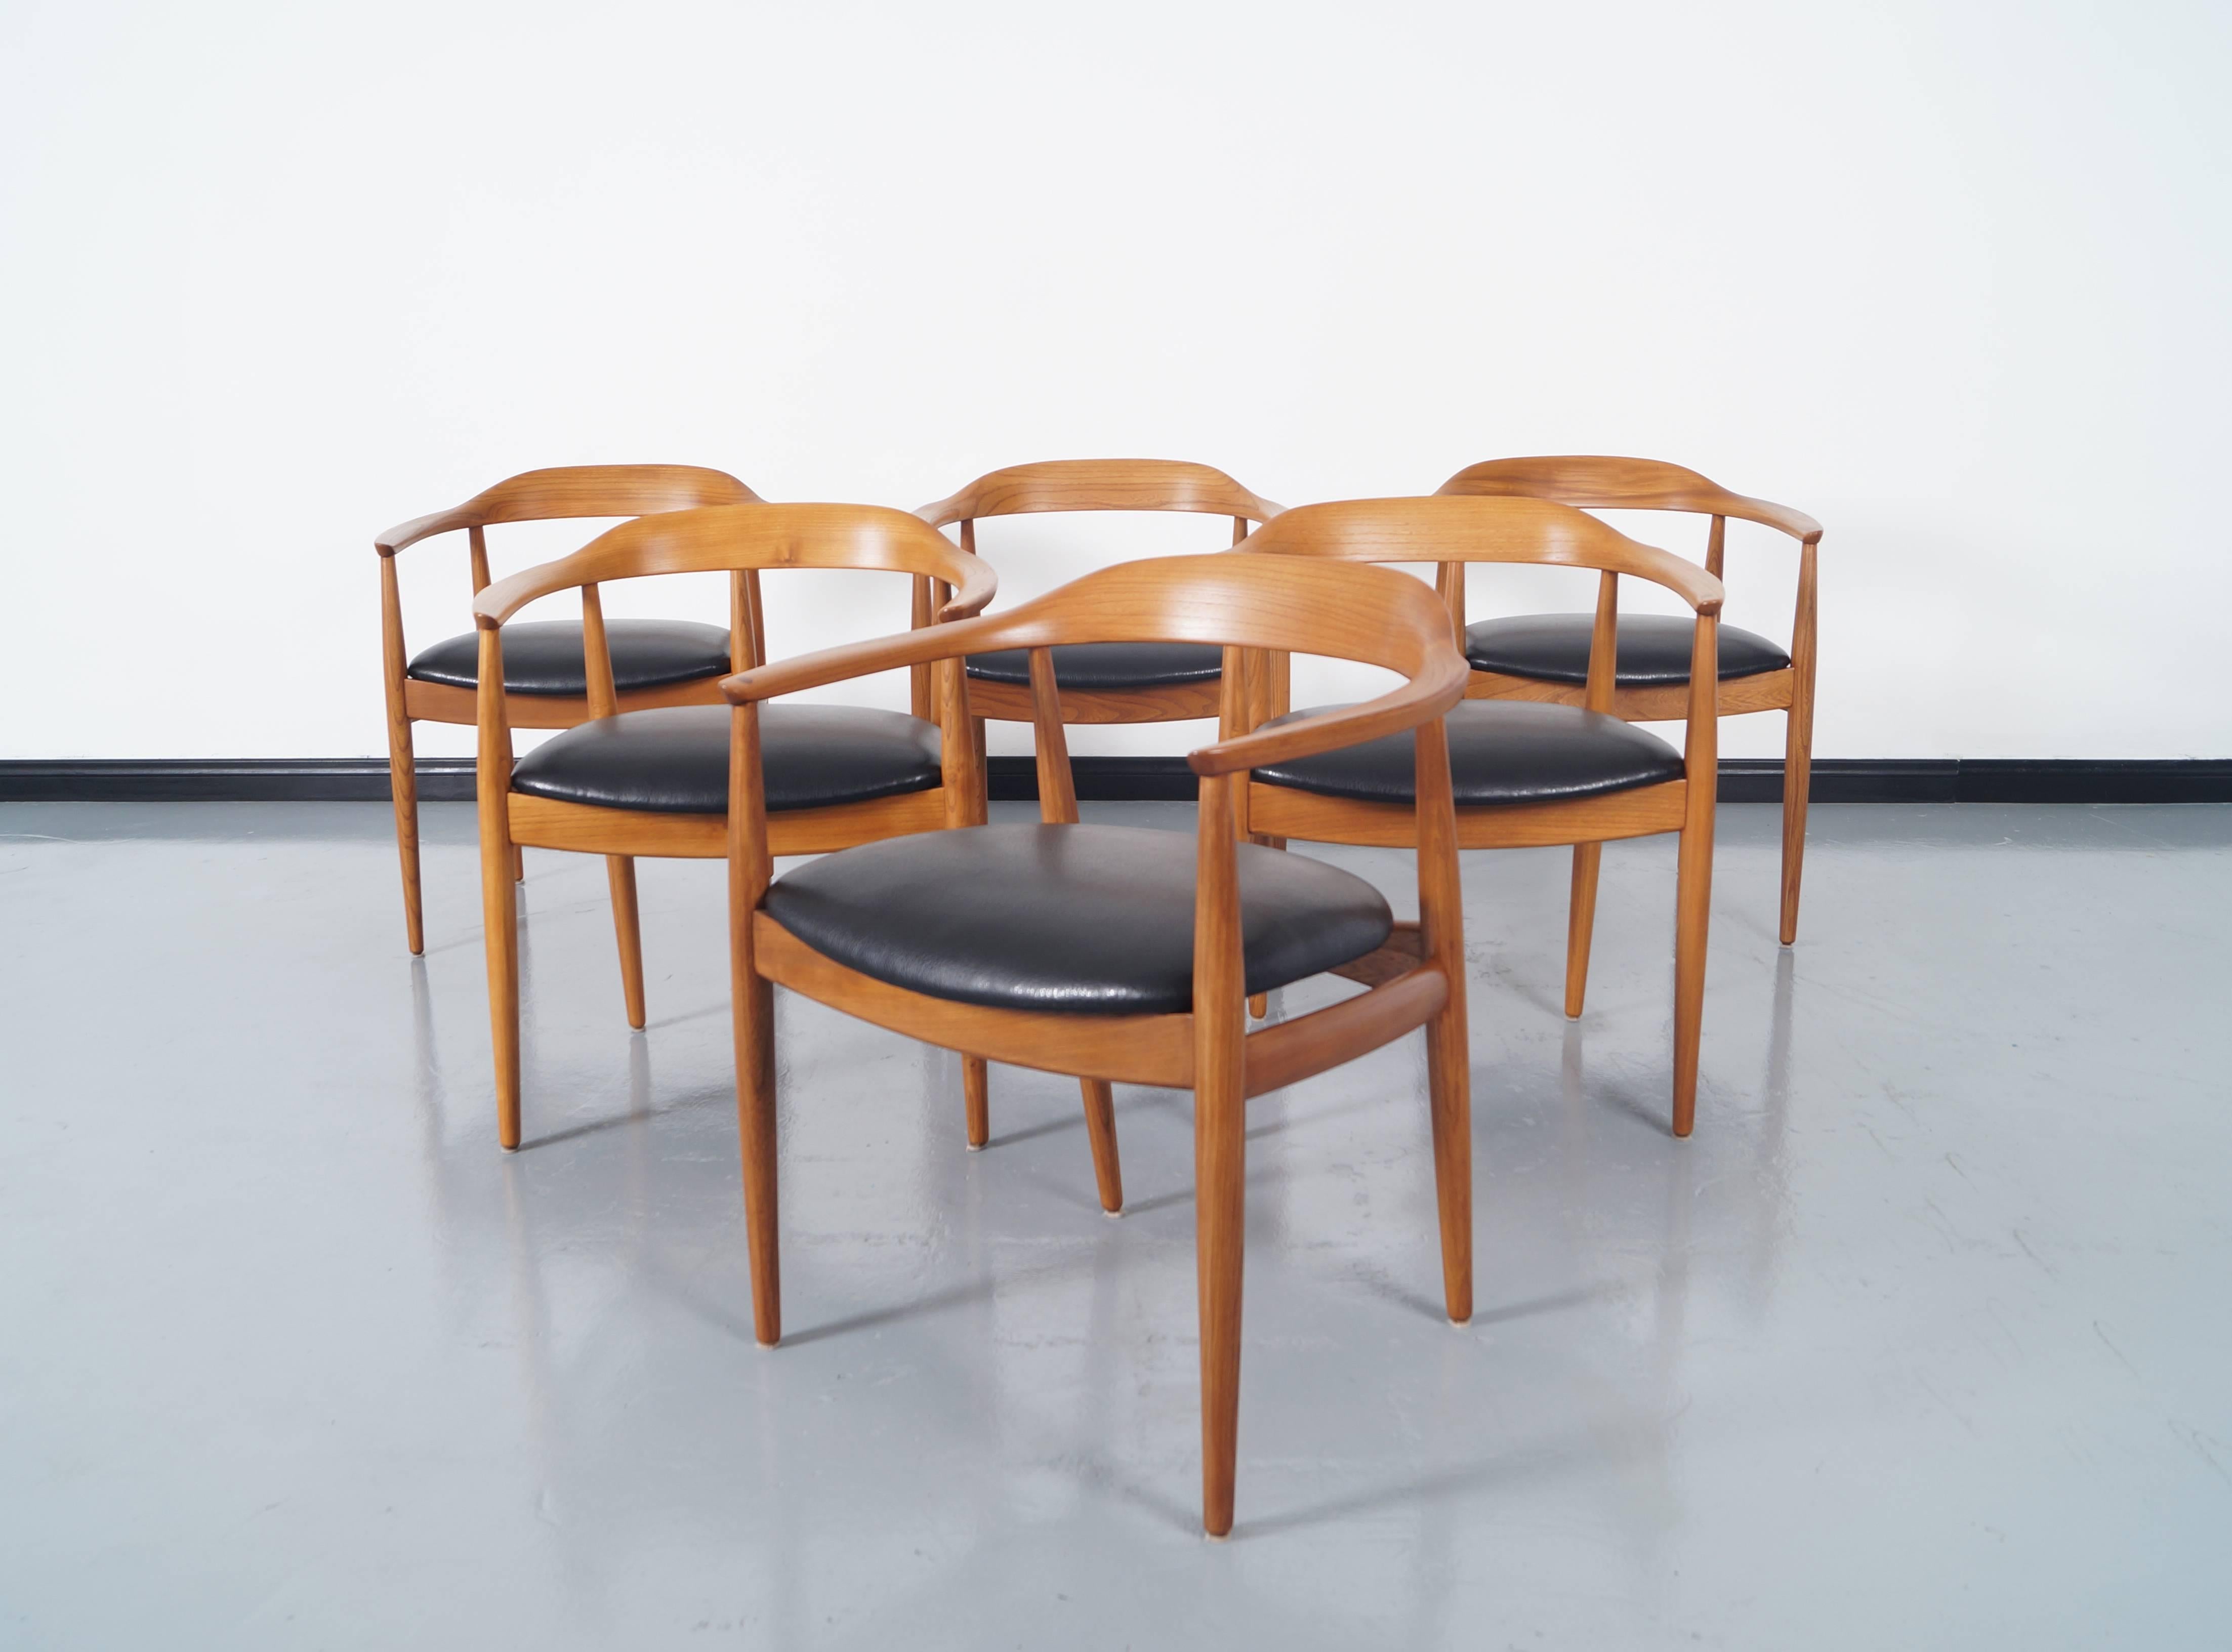 Rare Danish modern dining chairs by Niels Eilersen. This set of six dining chairs have been completely restored. These chairs are very similar to 